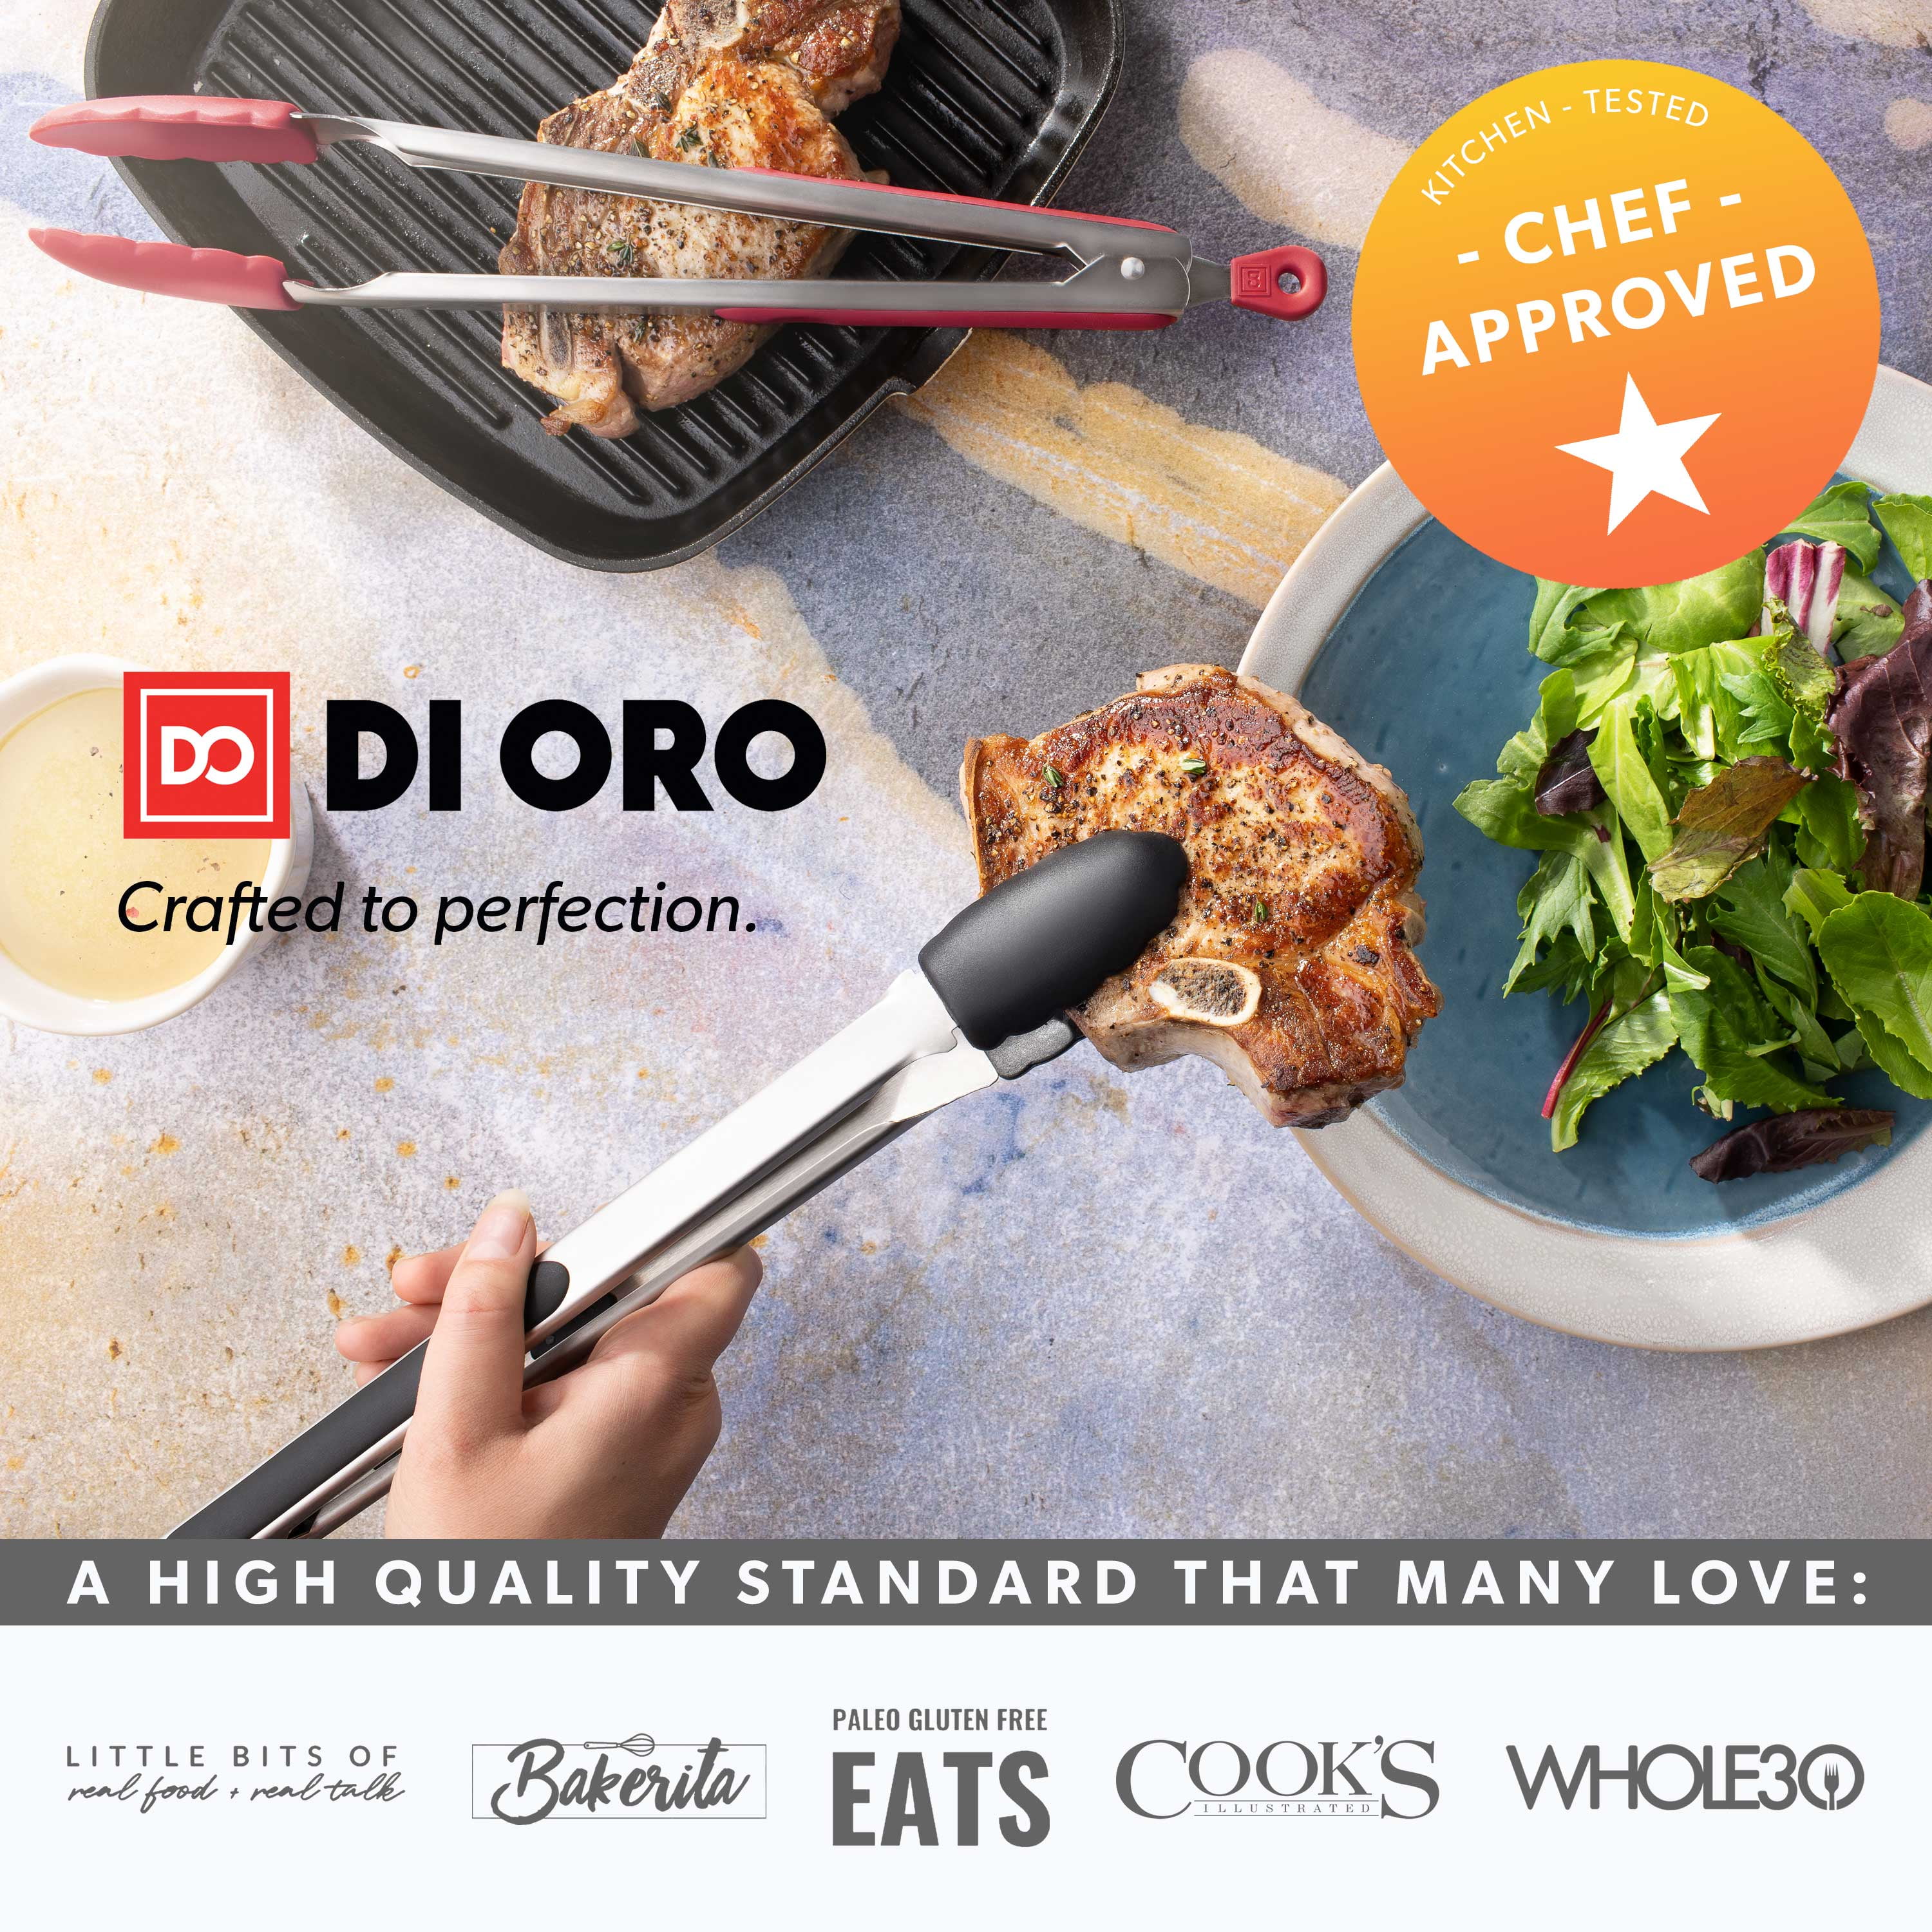 Serving New DI ORO 12-Inch Kitchen Tongs – Stainless Steel with Non-Stick 480F Heat-Resistant BPA Free Silicone Tips – Great Tool for Cooking Dishwasher Safe and Easy to Clean Black and Barbecuing